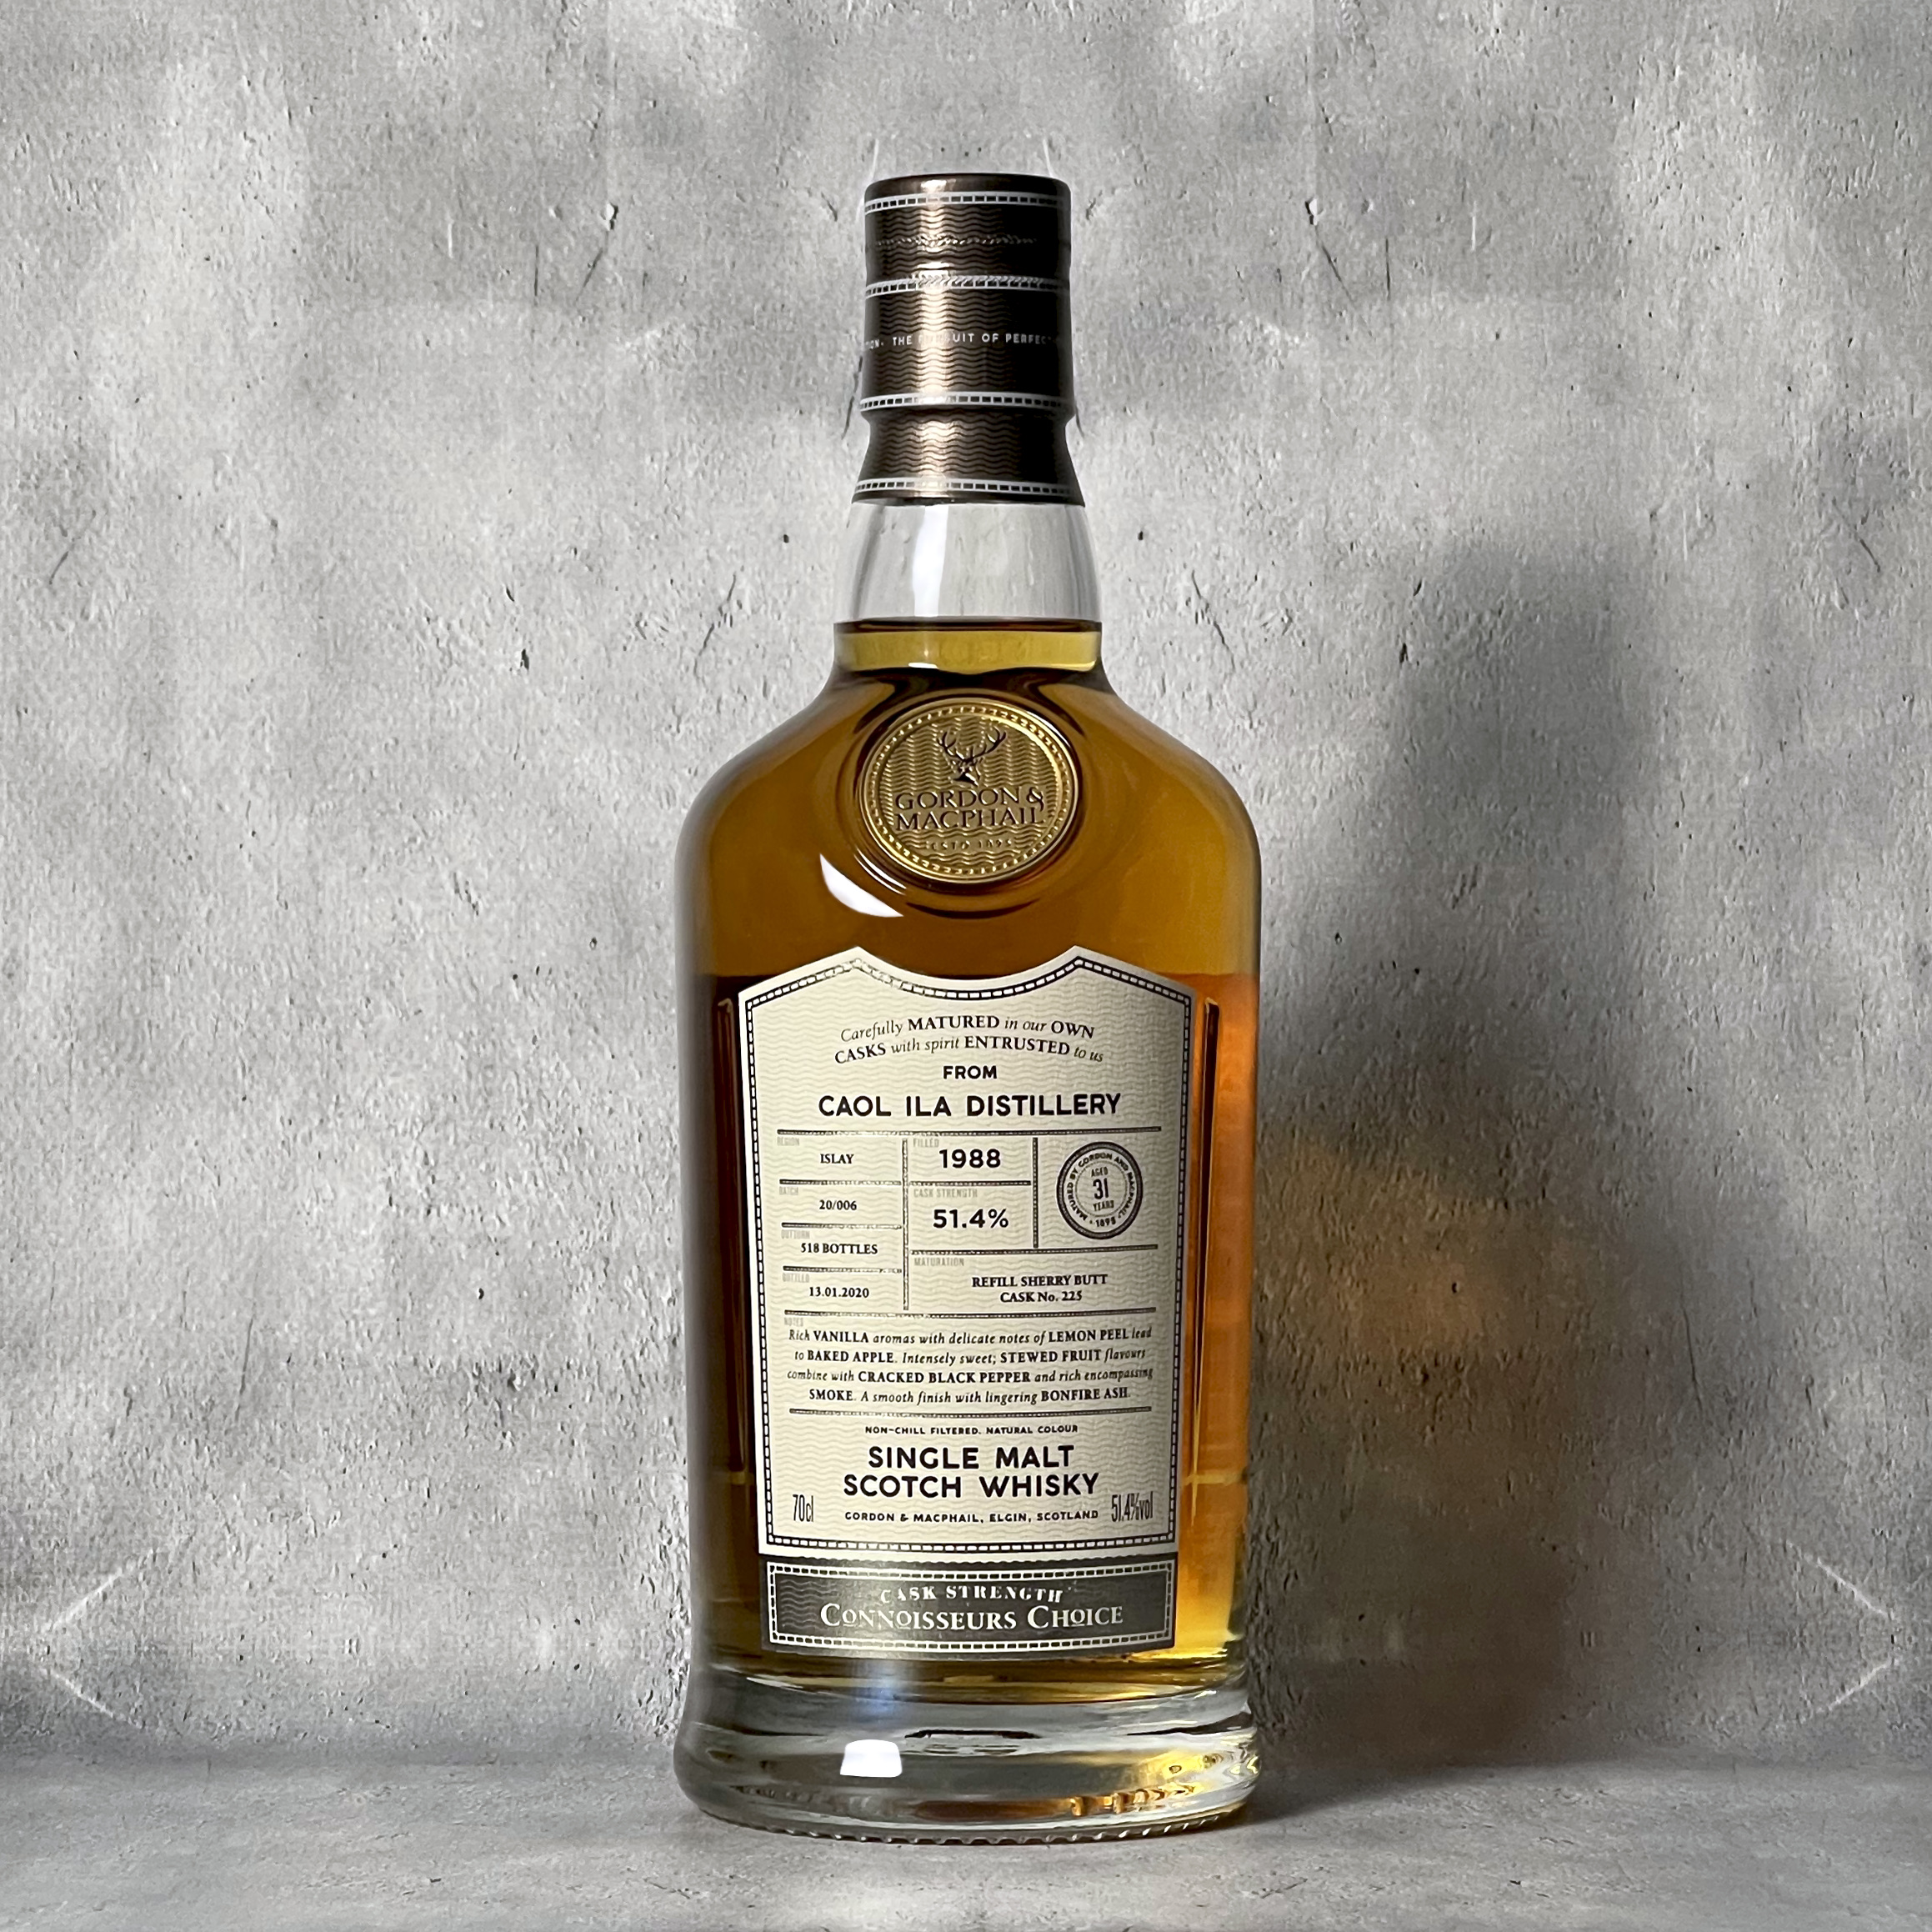 WHISKY LOVERS ONLINESHOP / カリラ 1988 31年 リフィルシェリーバット 